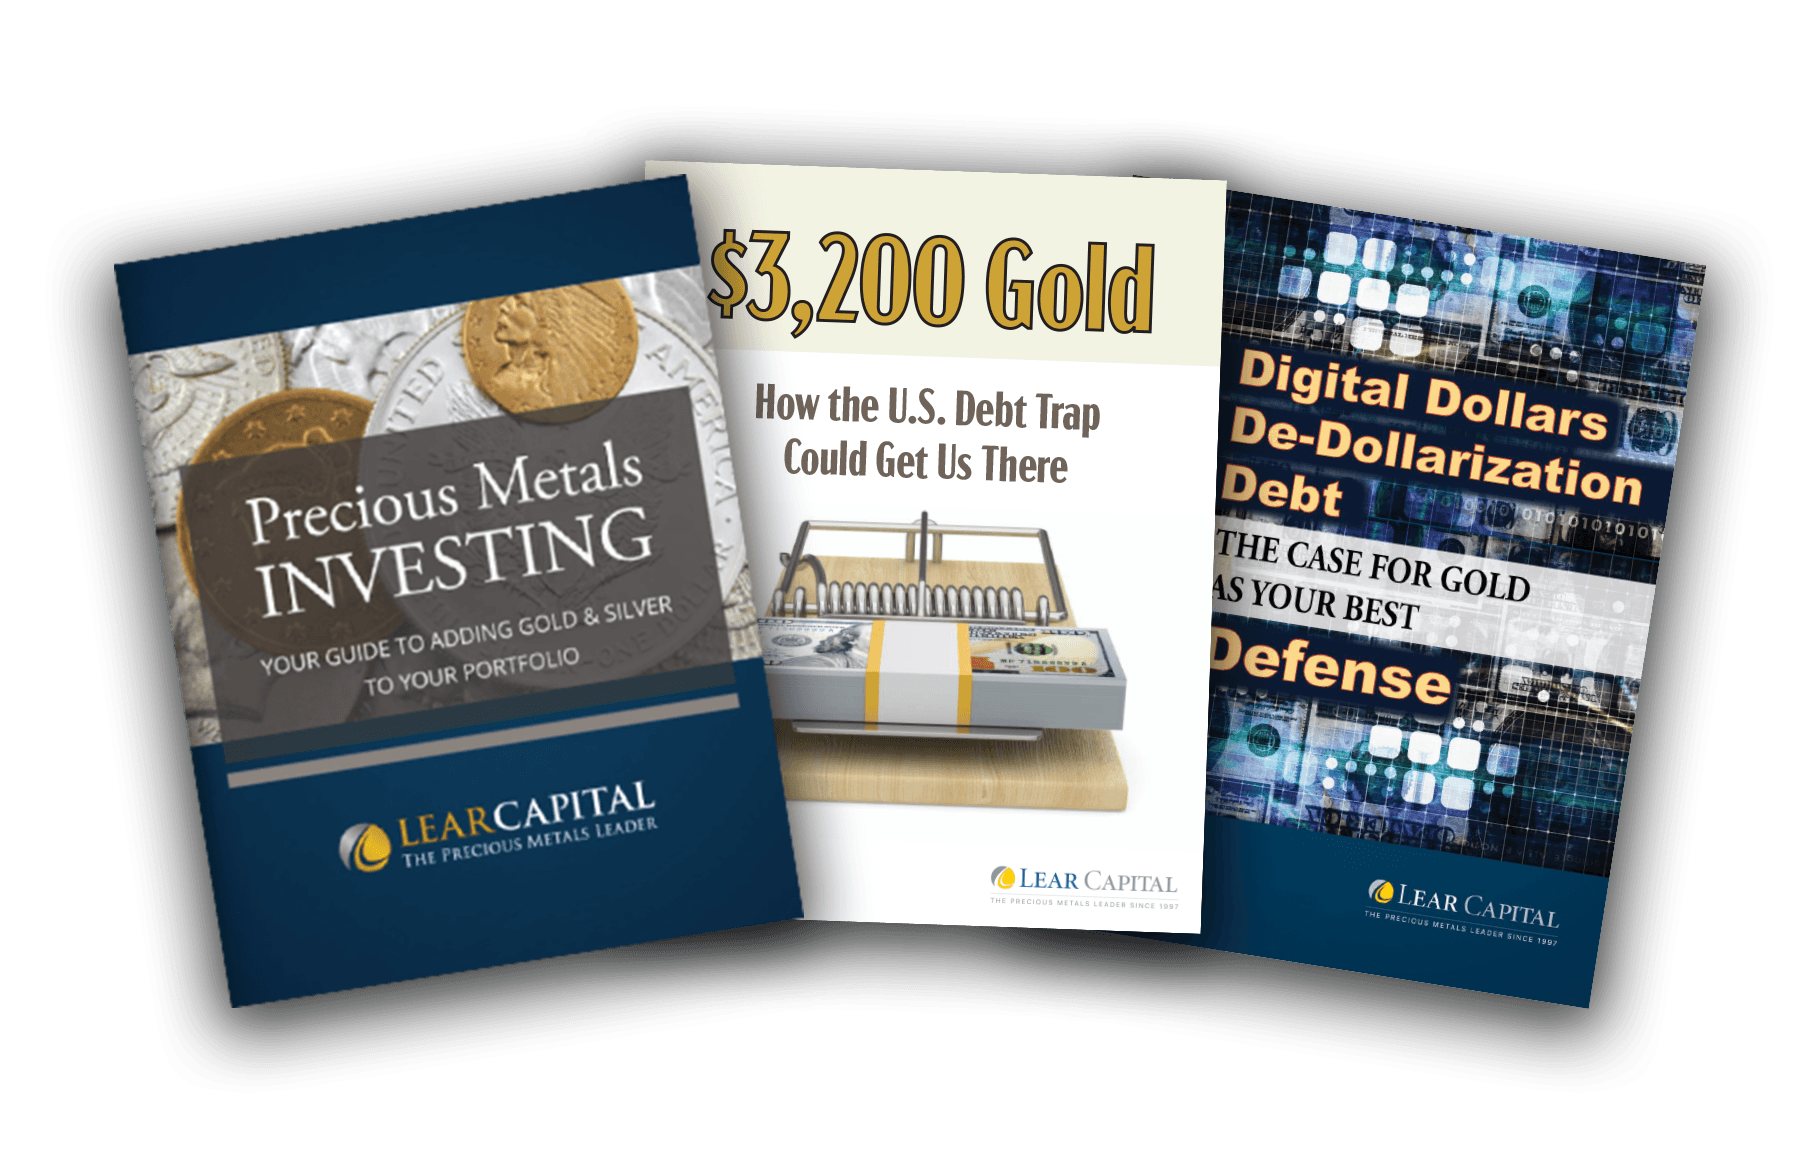 Precious Metals Investing, $3,200 Gold, and DDD report covers